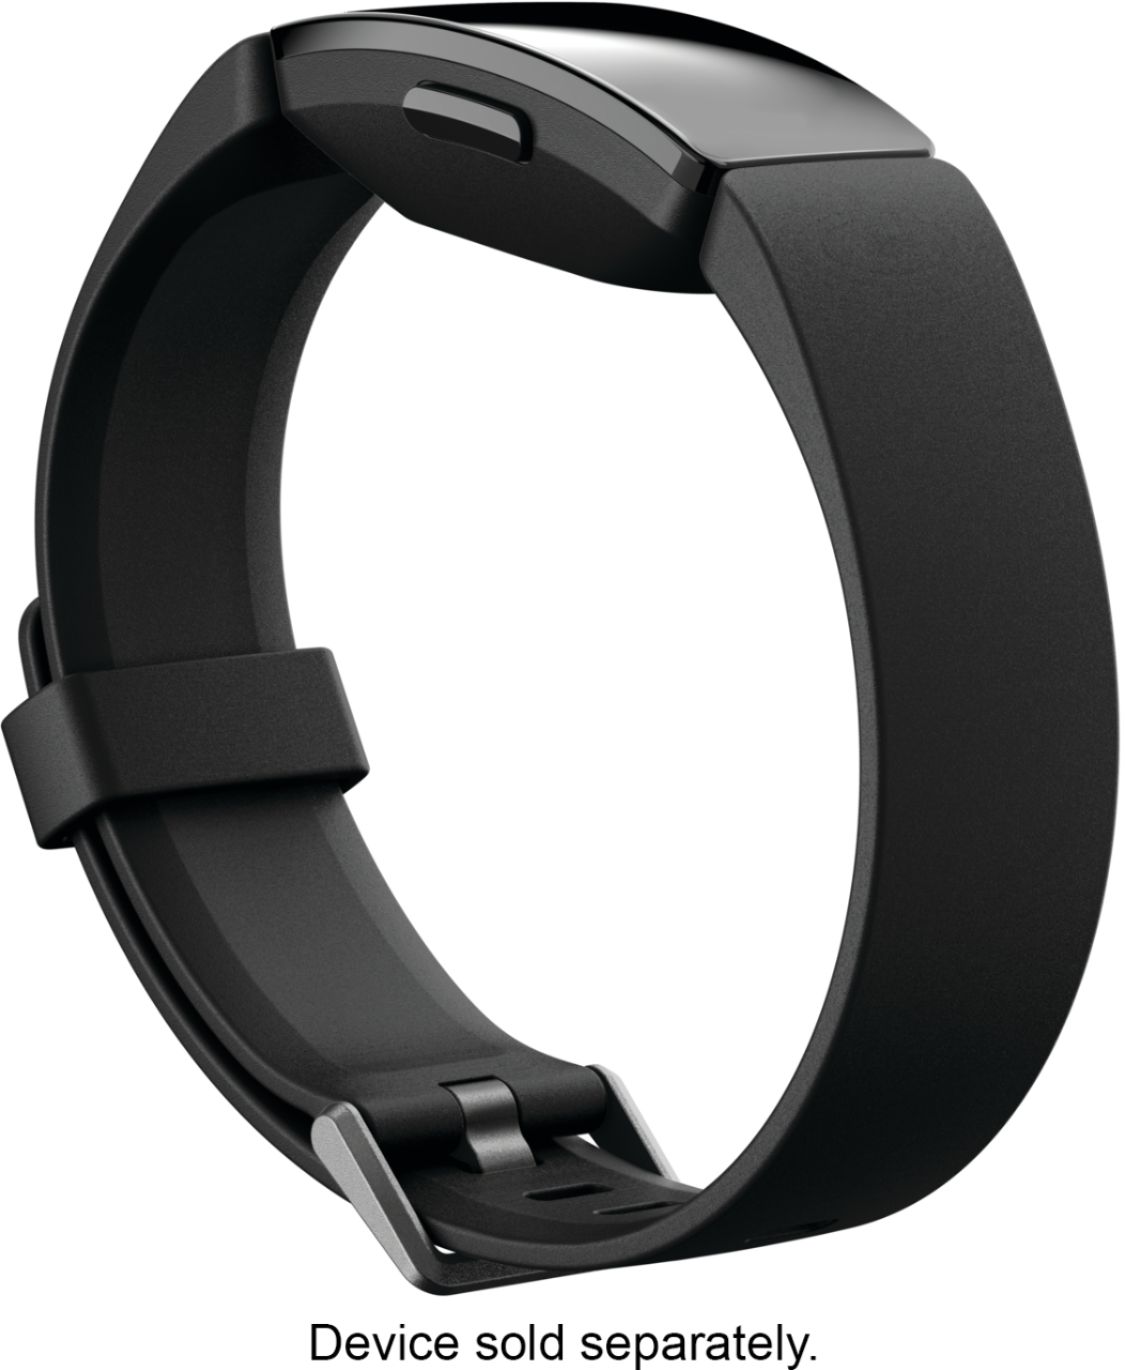 Armband for Fitbit Inspire - Large - Black